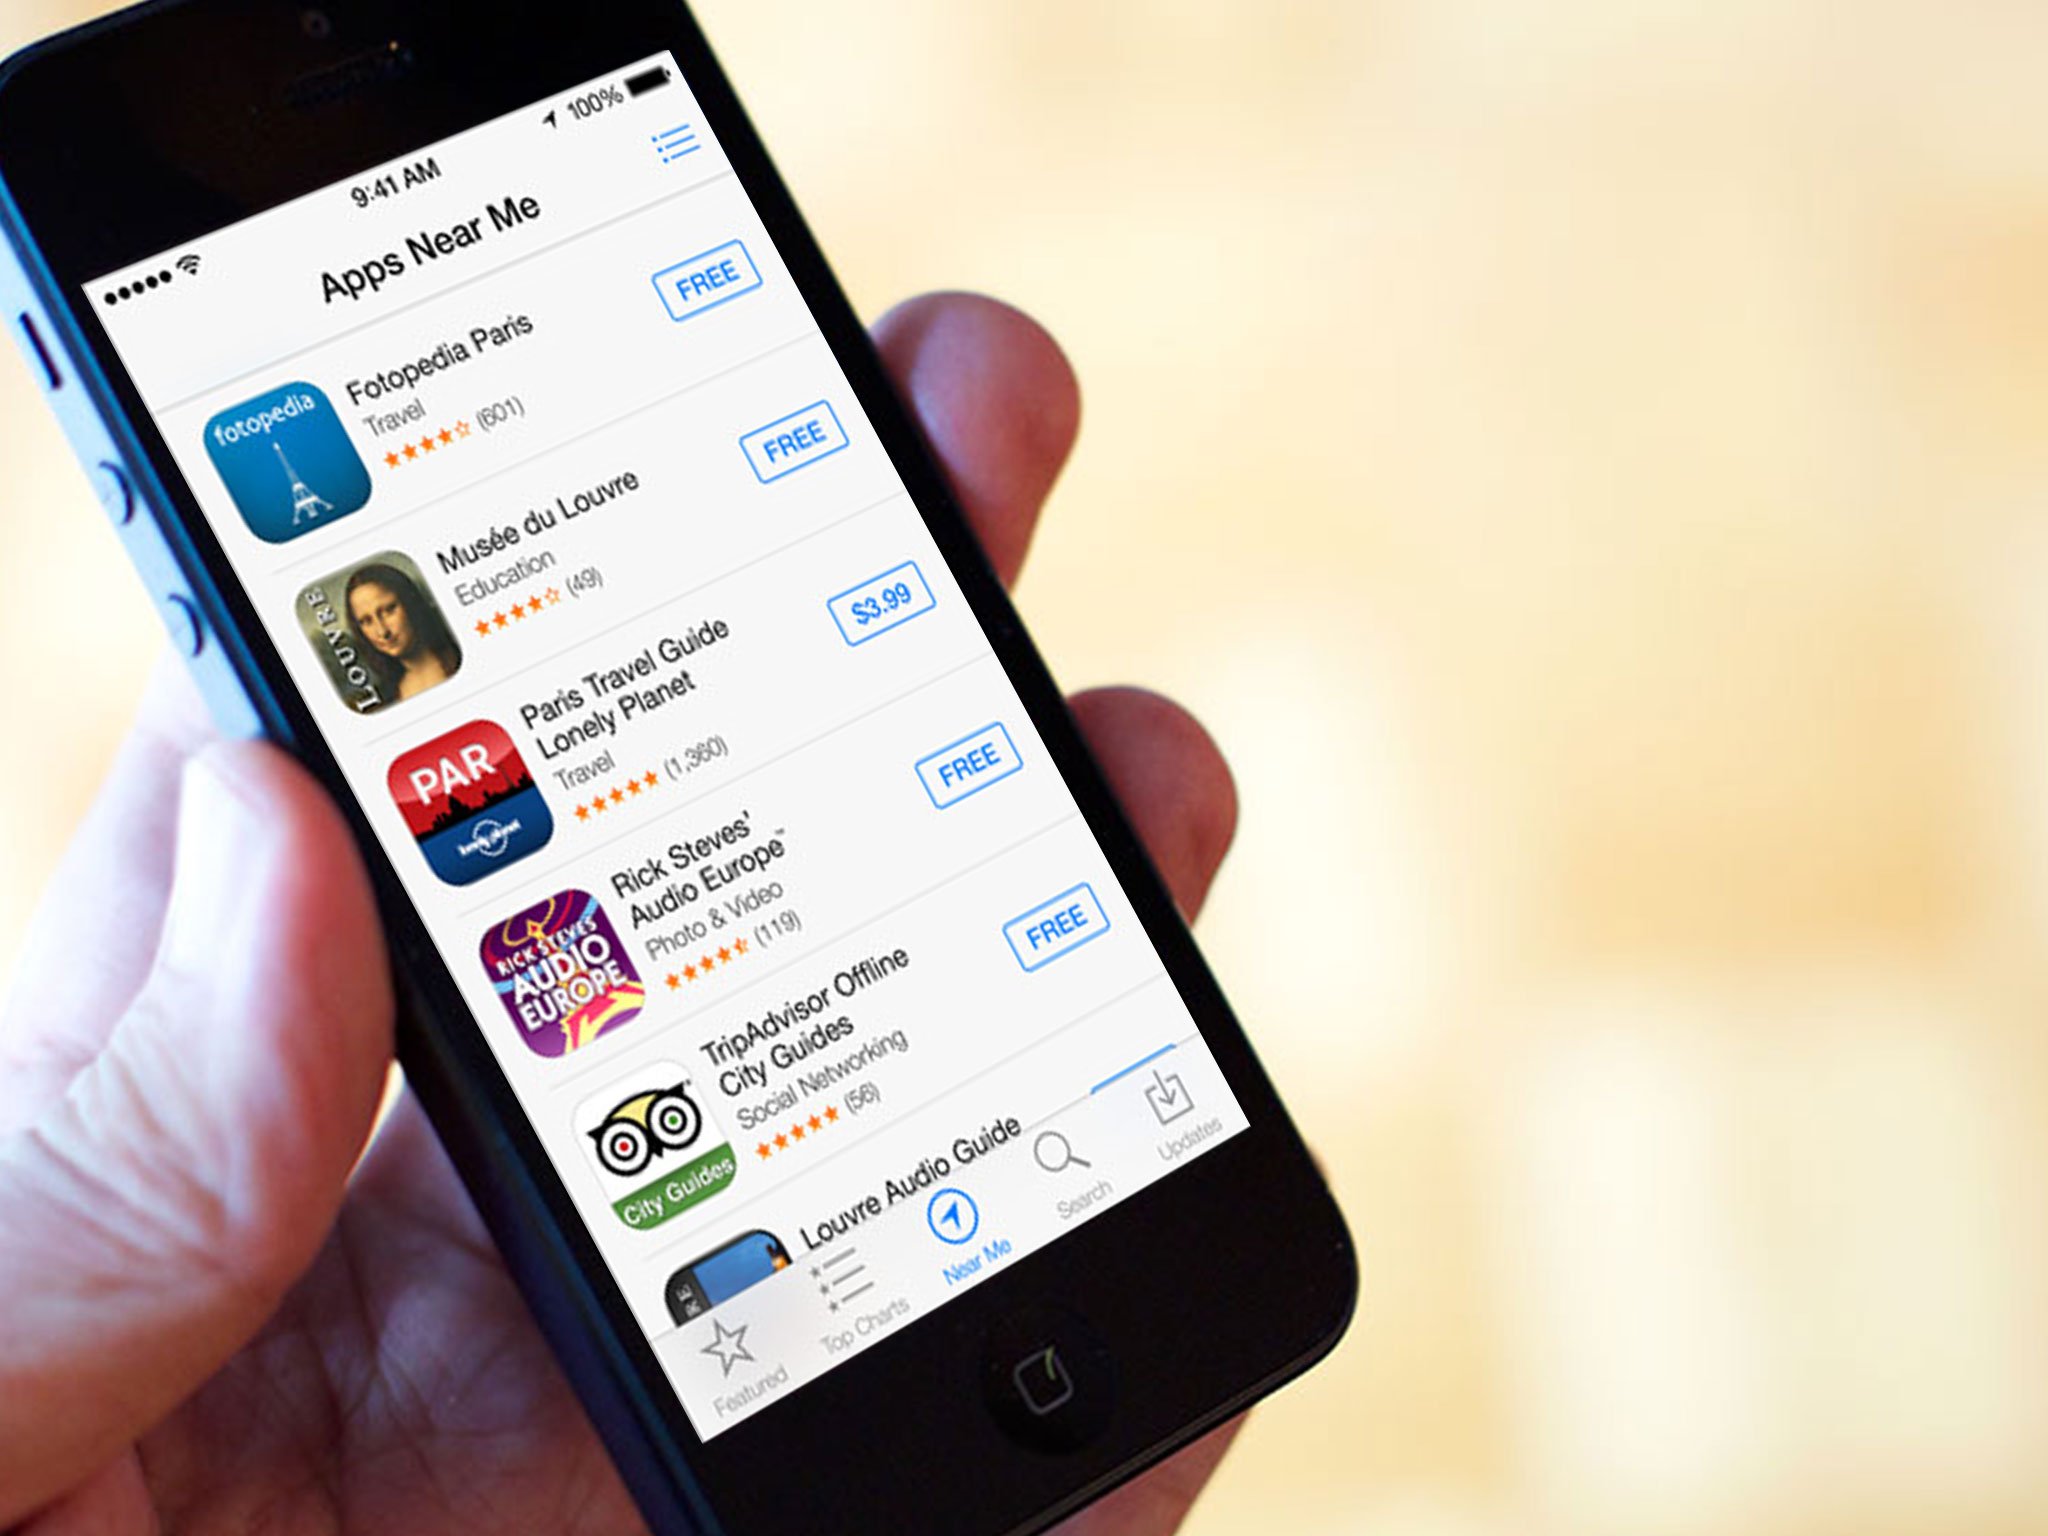 Ask iMore: How the #@$& do you find anything with App Store search? | iMore